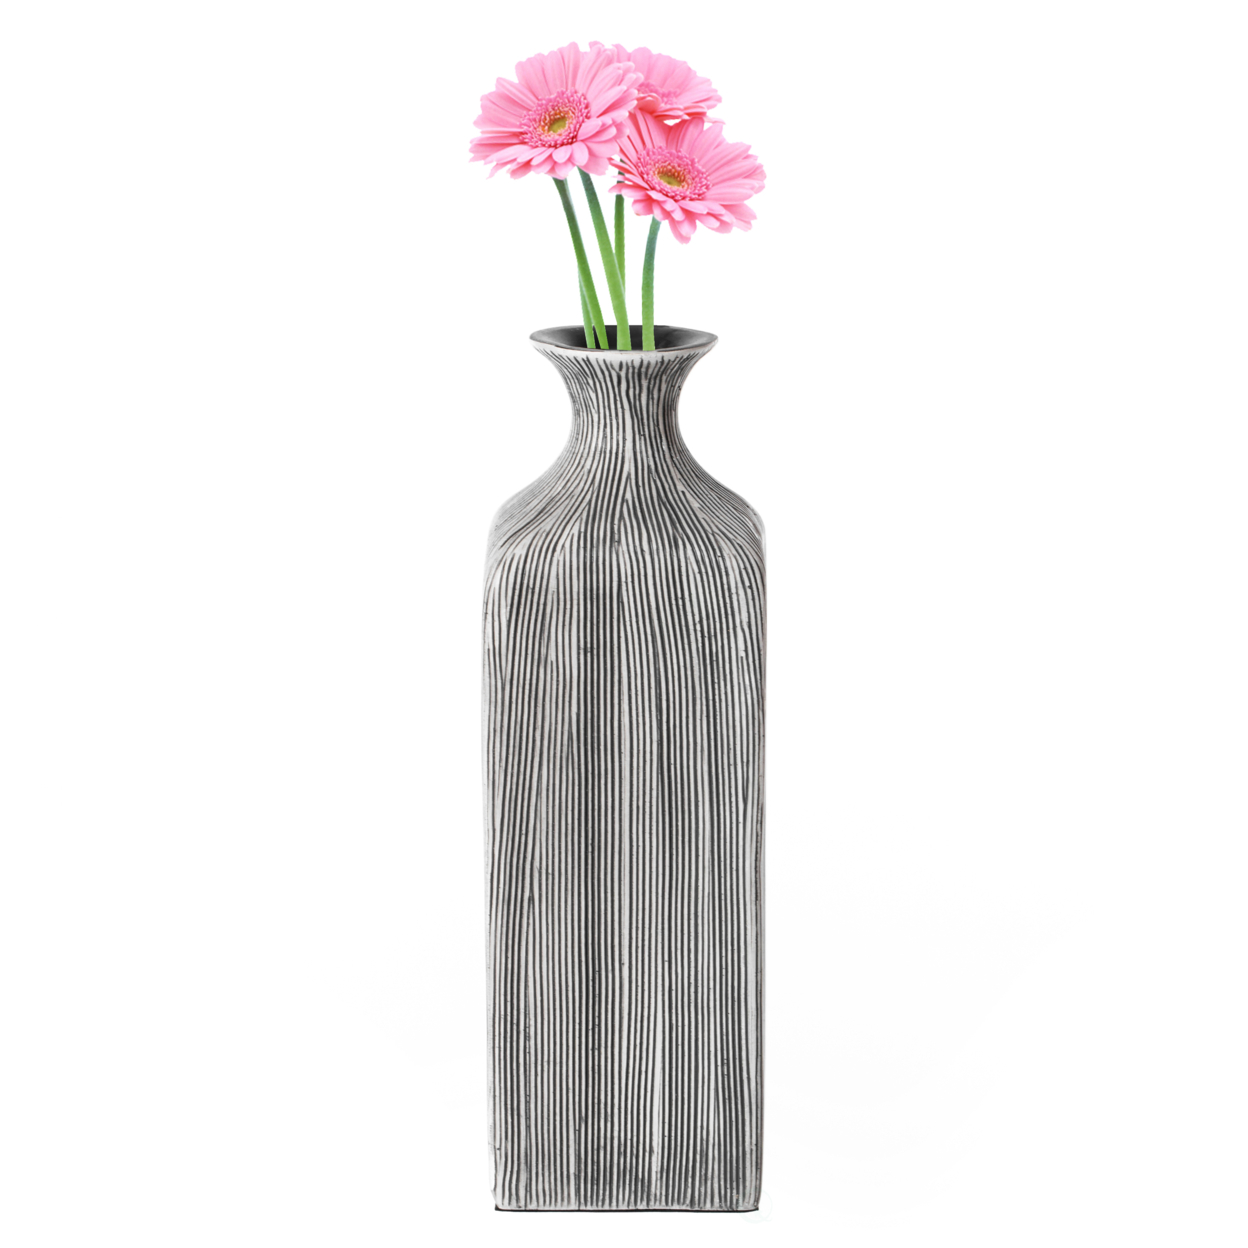 Contemporary Decorative Square Table Flower Vase With Gray Striped Design - Small